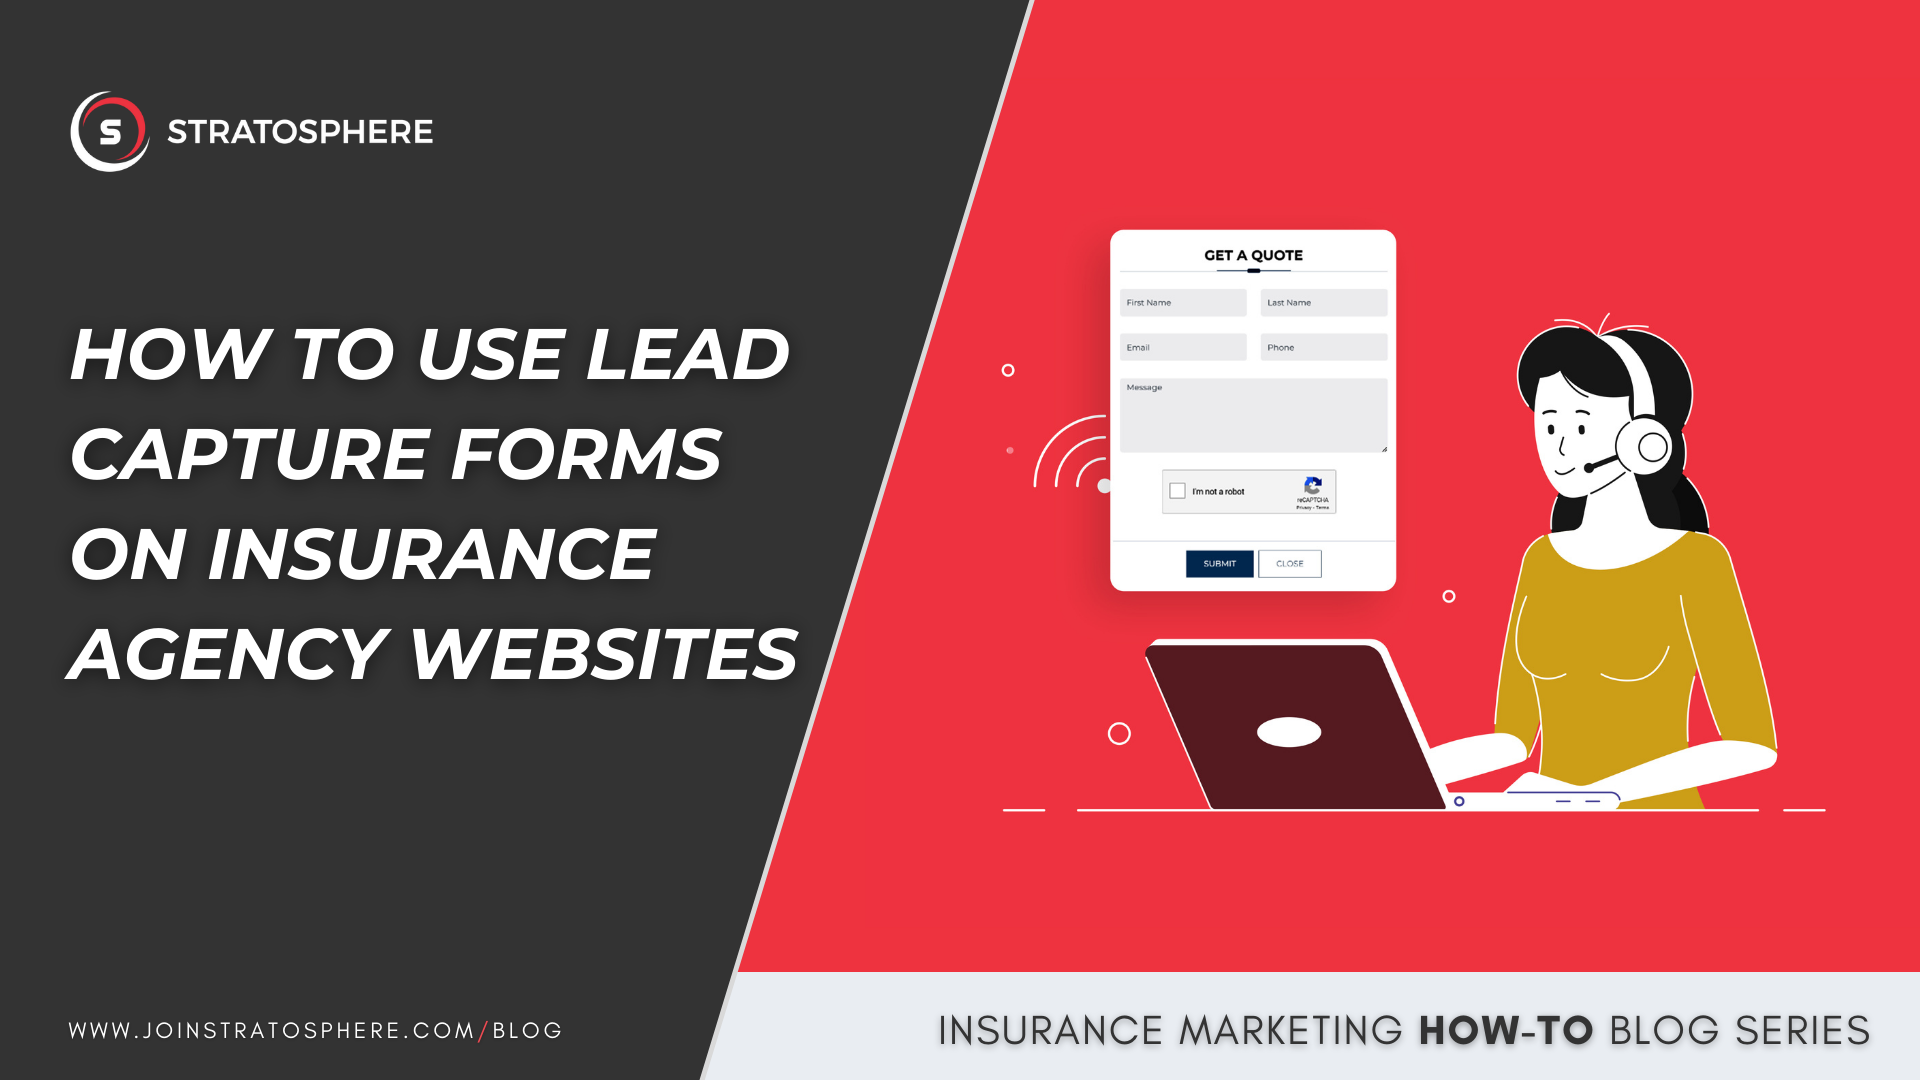 How to Use Lead Capture Forms on Insurance Agency Websites